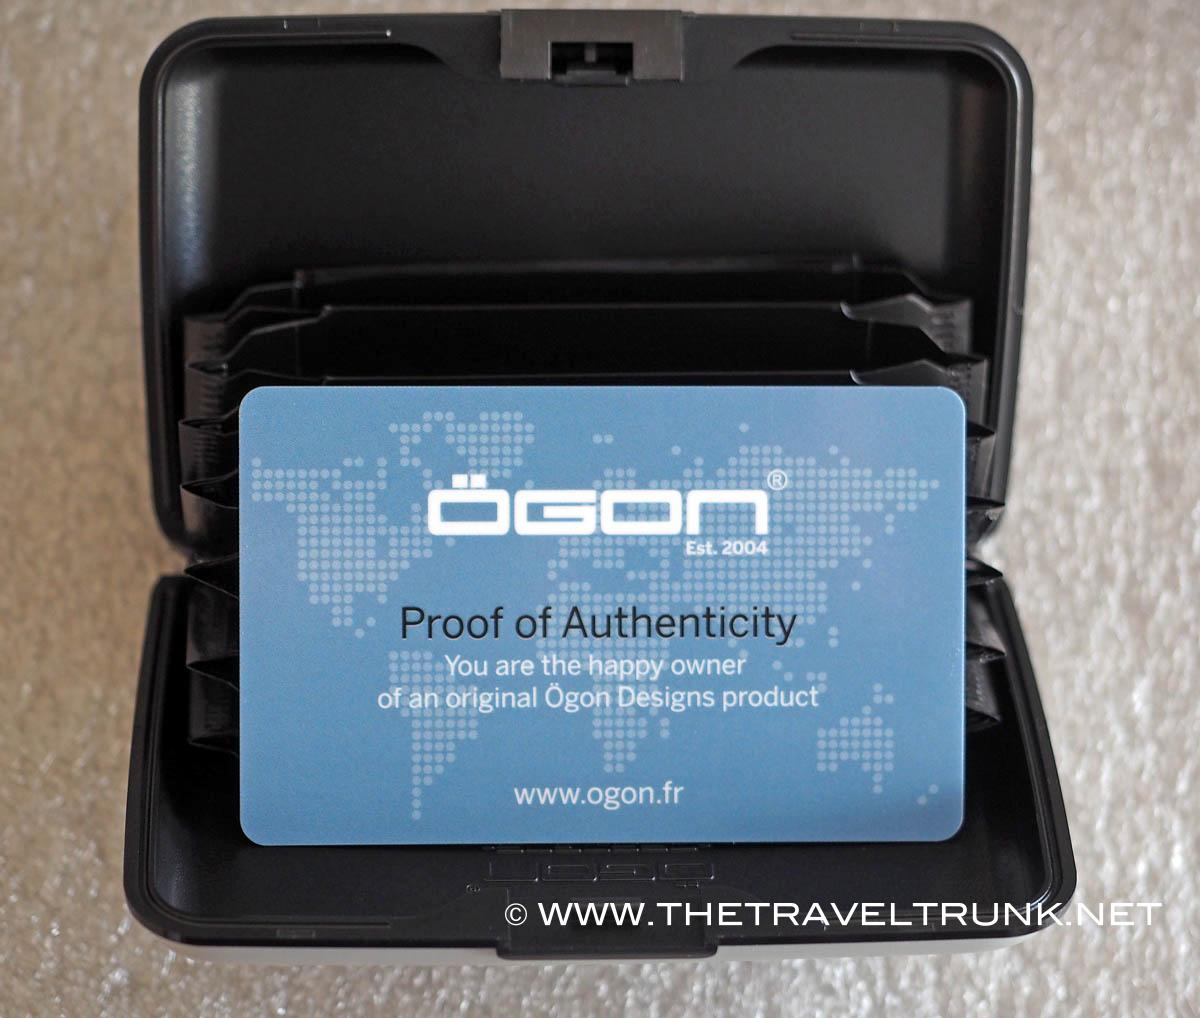 The Ögon wallet may help you keep in credit while on the move.